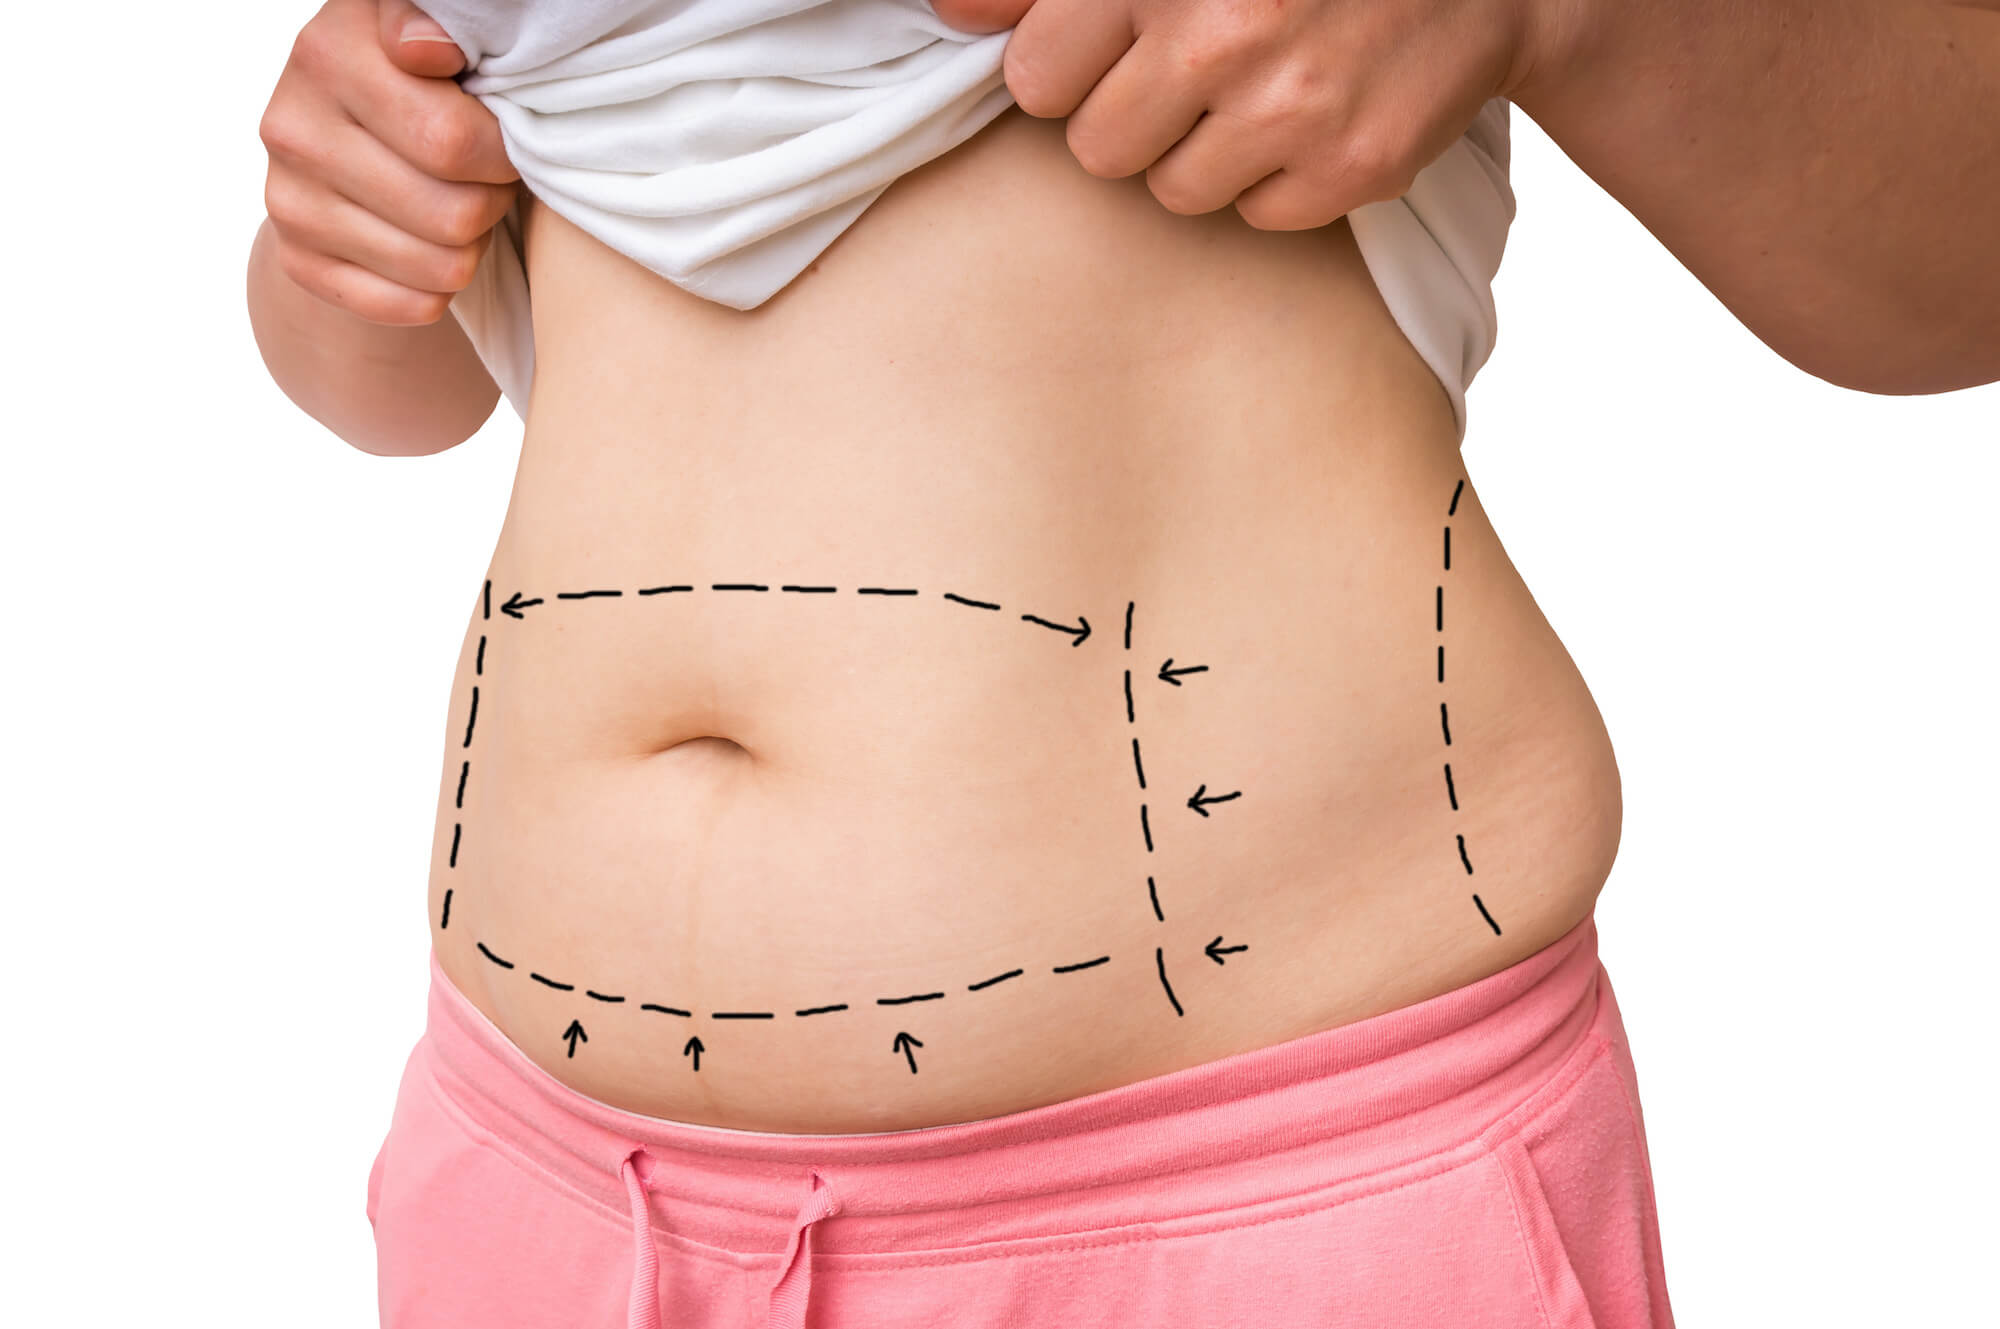 Woman With Lines on Her Stomach to Prep for Tummy Tuck Surgery